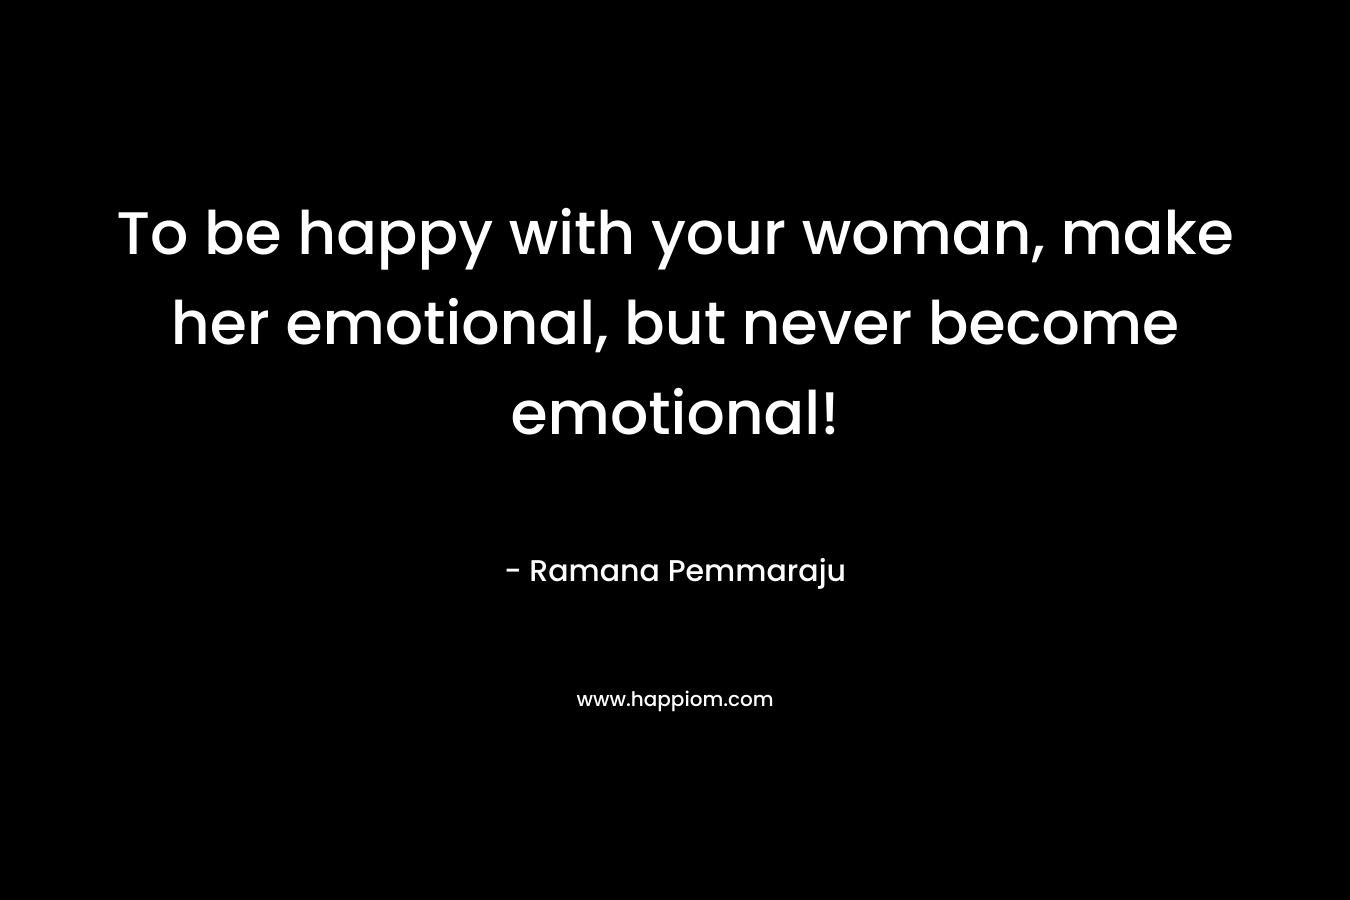 To be happy with your woman, make her emotional, but never become emotional!